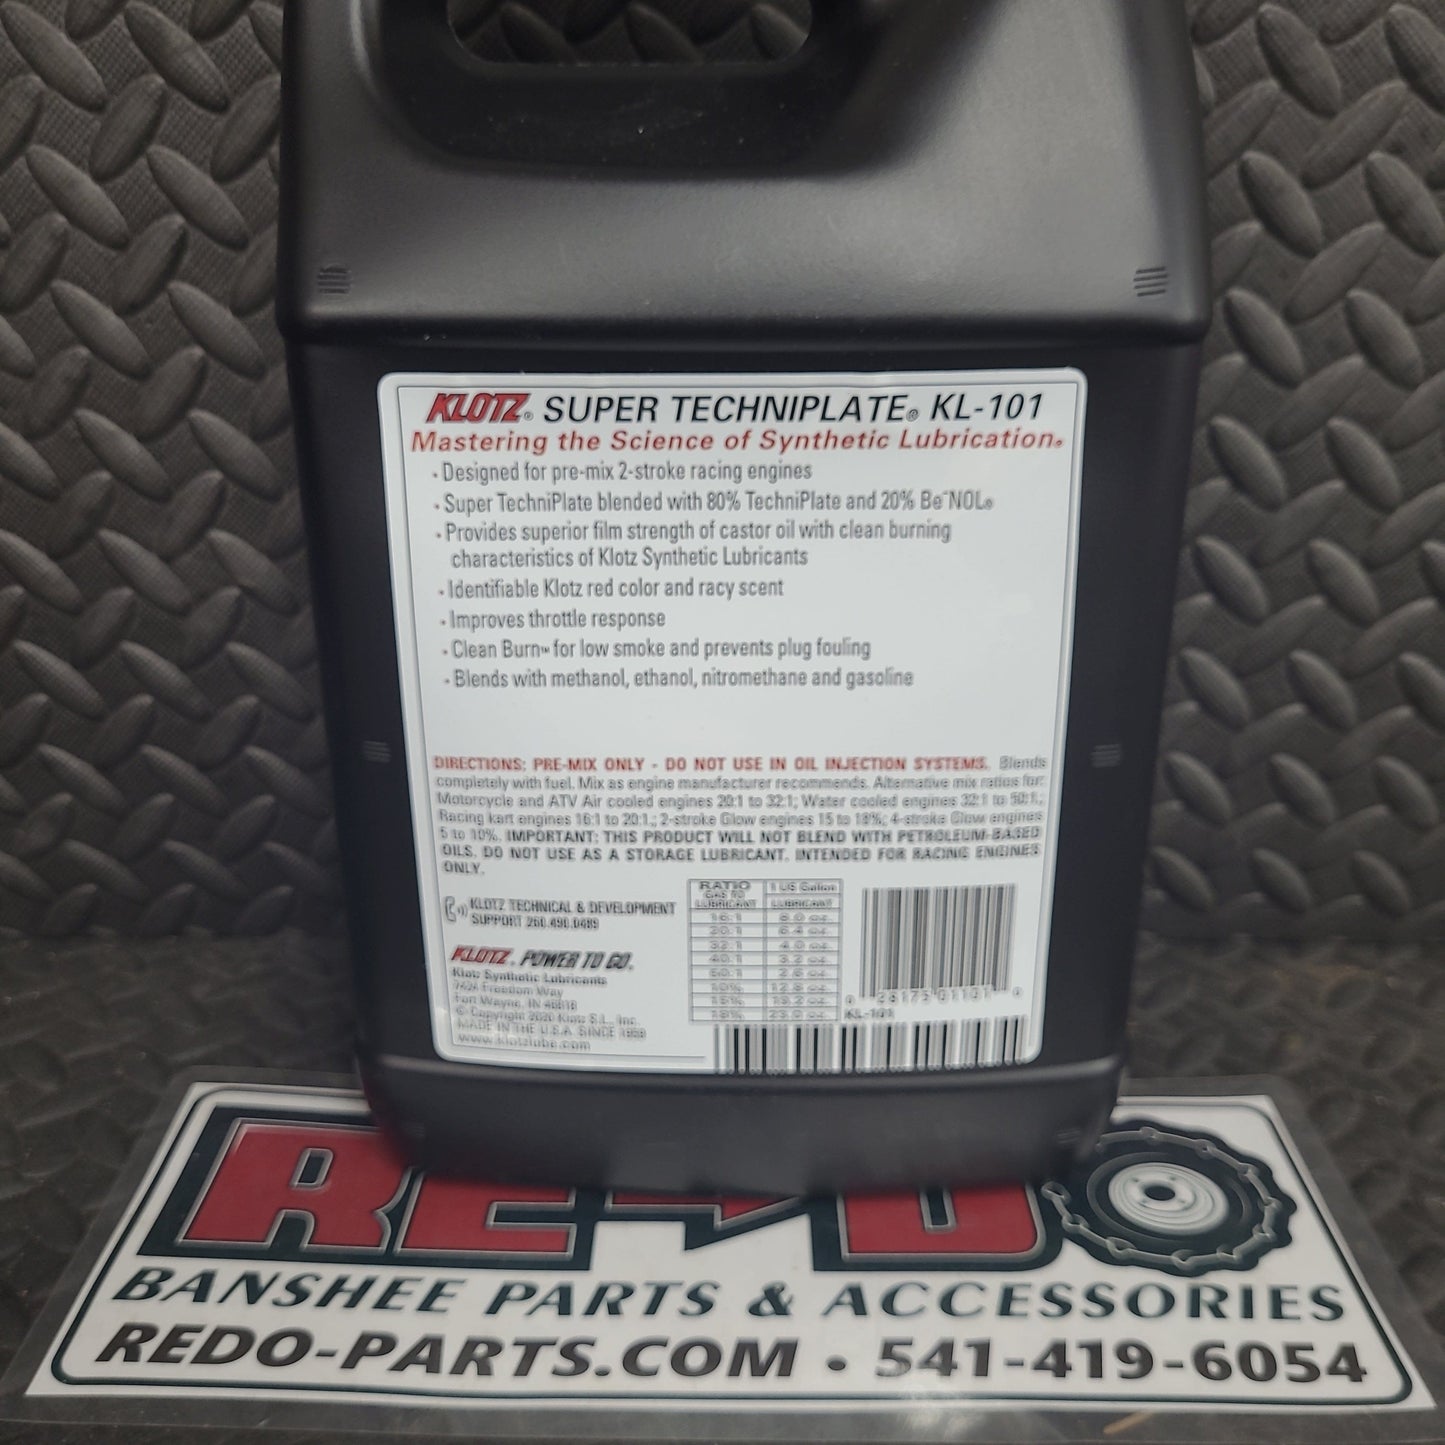 KLOTZ R-50 Racing 2-Stroke Pre-Mix Techniplate Synthetic Oil, 1 Gallon –  Re-Do Banshee Parts and Accessories